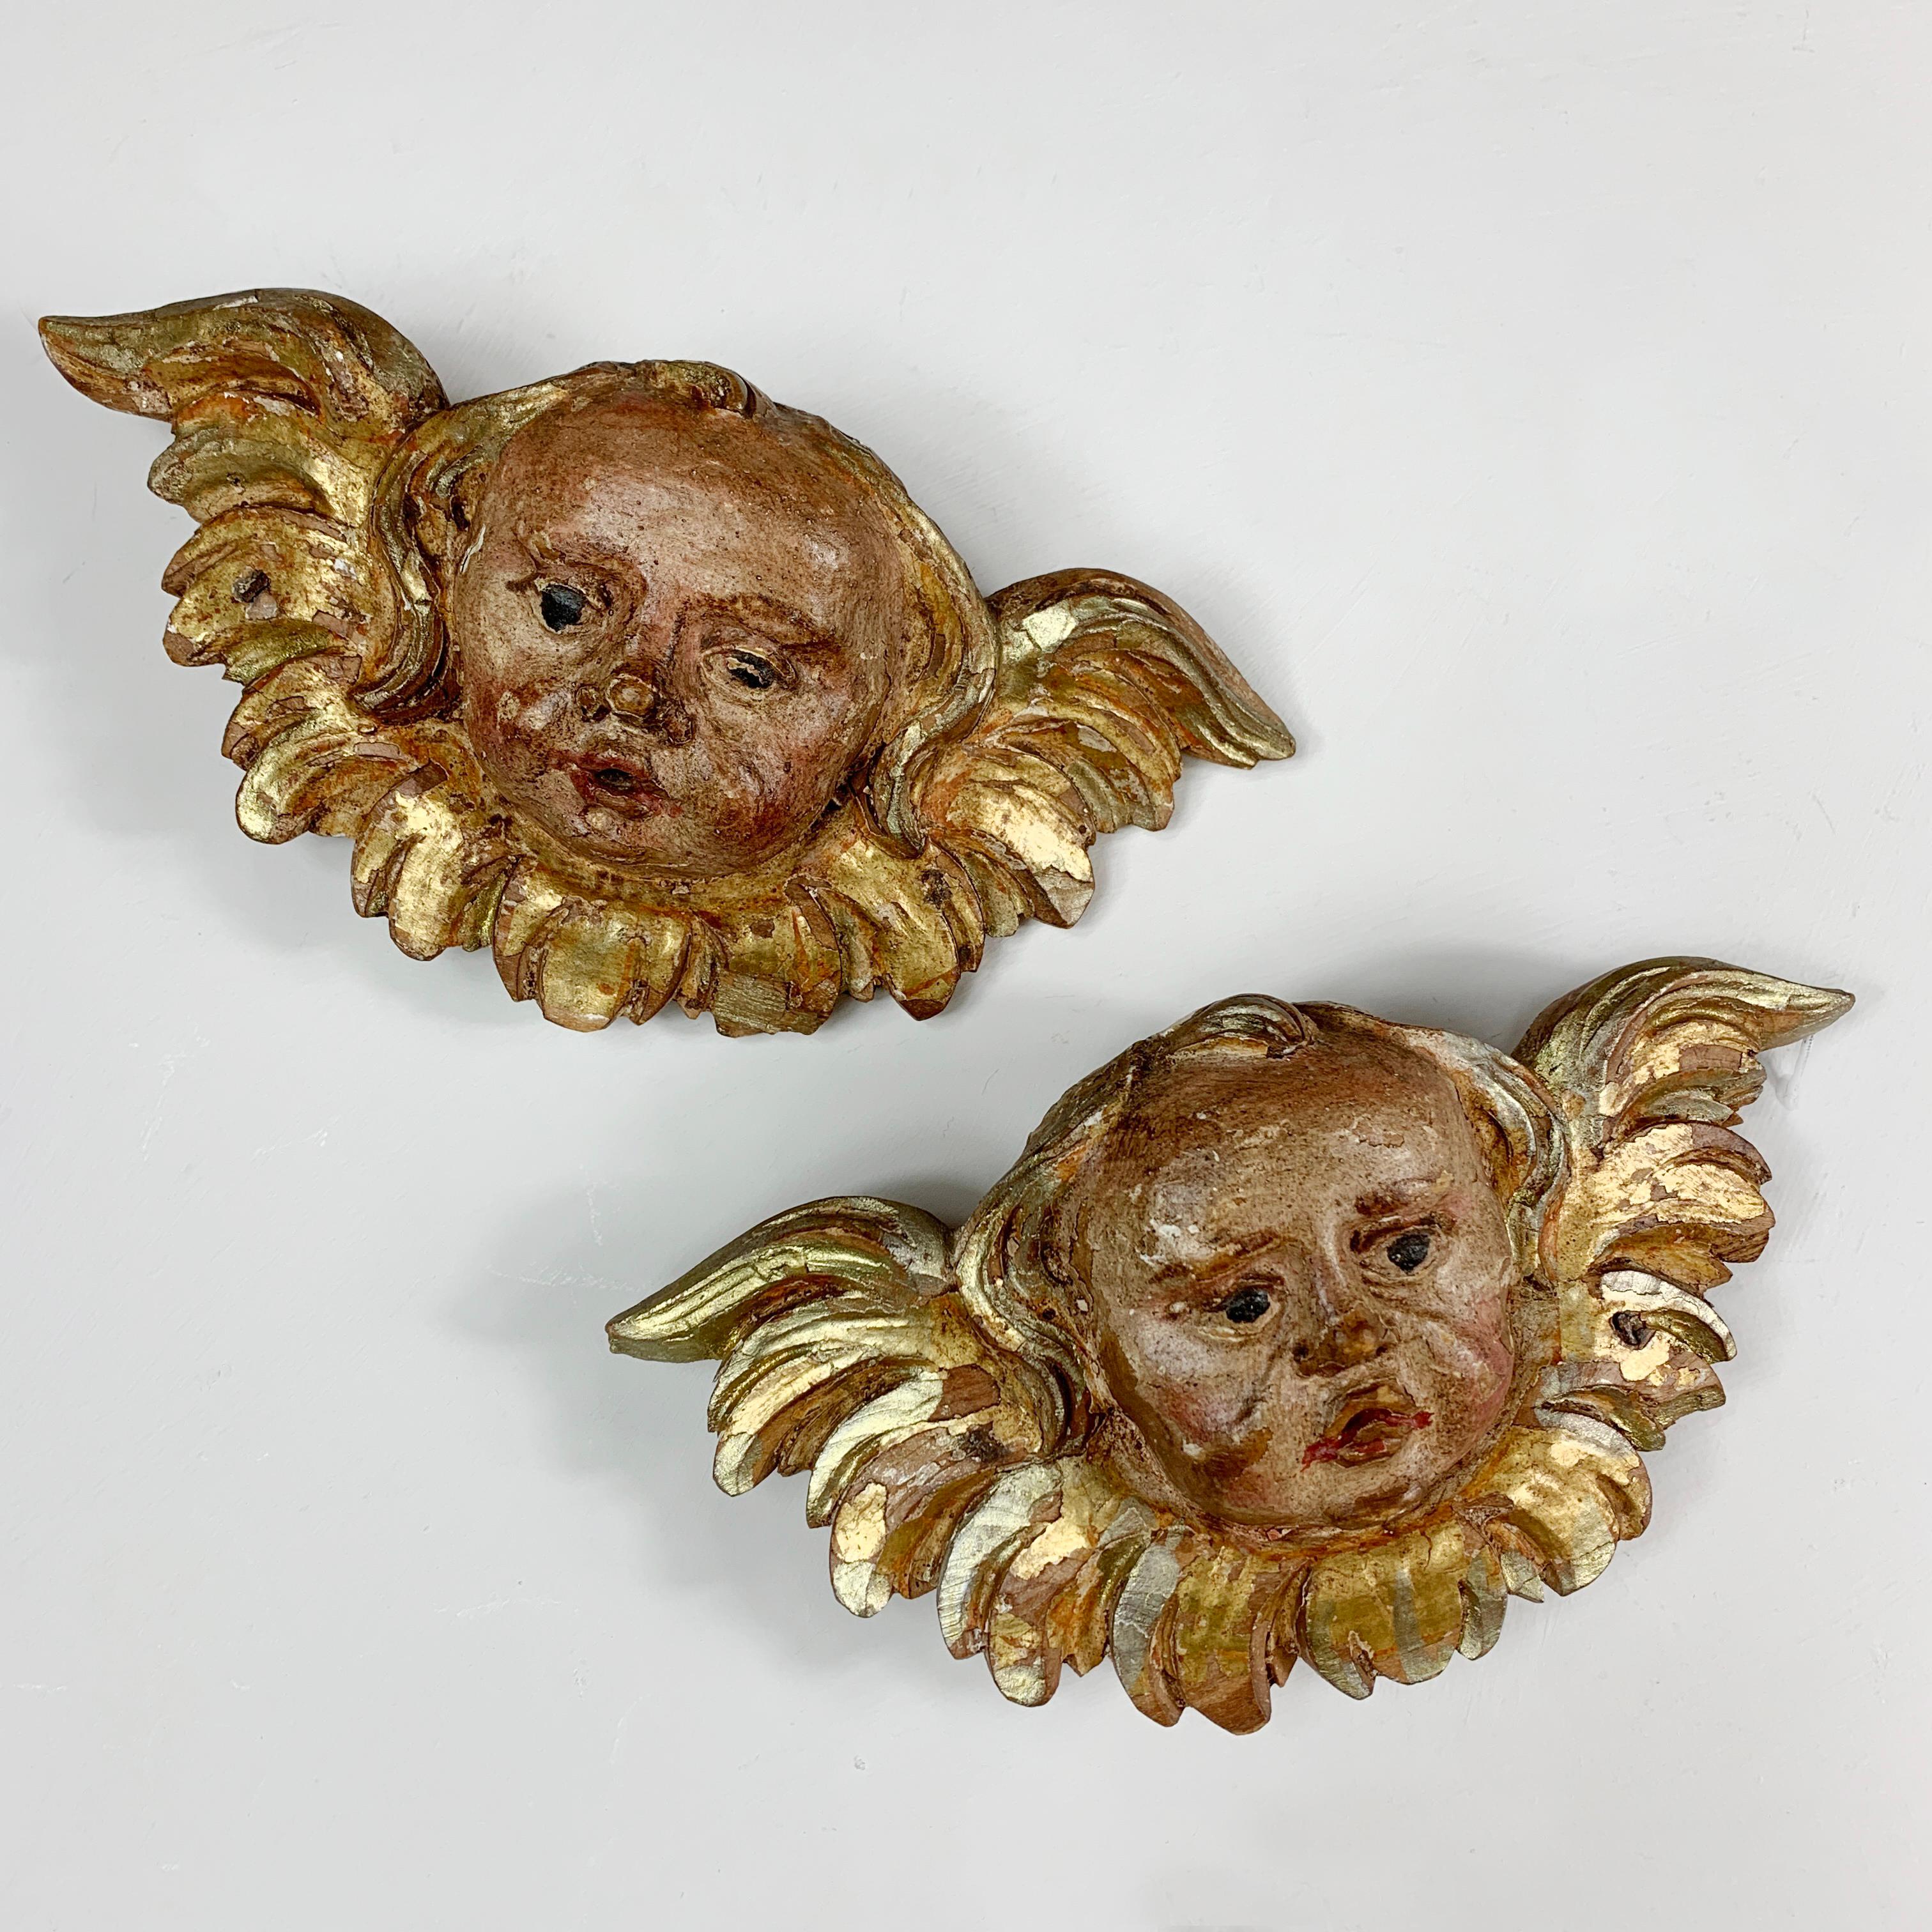 A superb pair of early 1700’s German Baroque putti, hand carved in wood with a thin layer of gesso, and painted in polychrome and gilt, these originally adorned the walls of a cathedral, the original nails that held them in place are still embedded